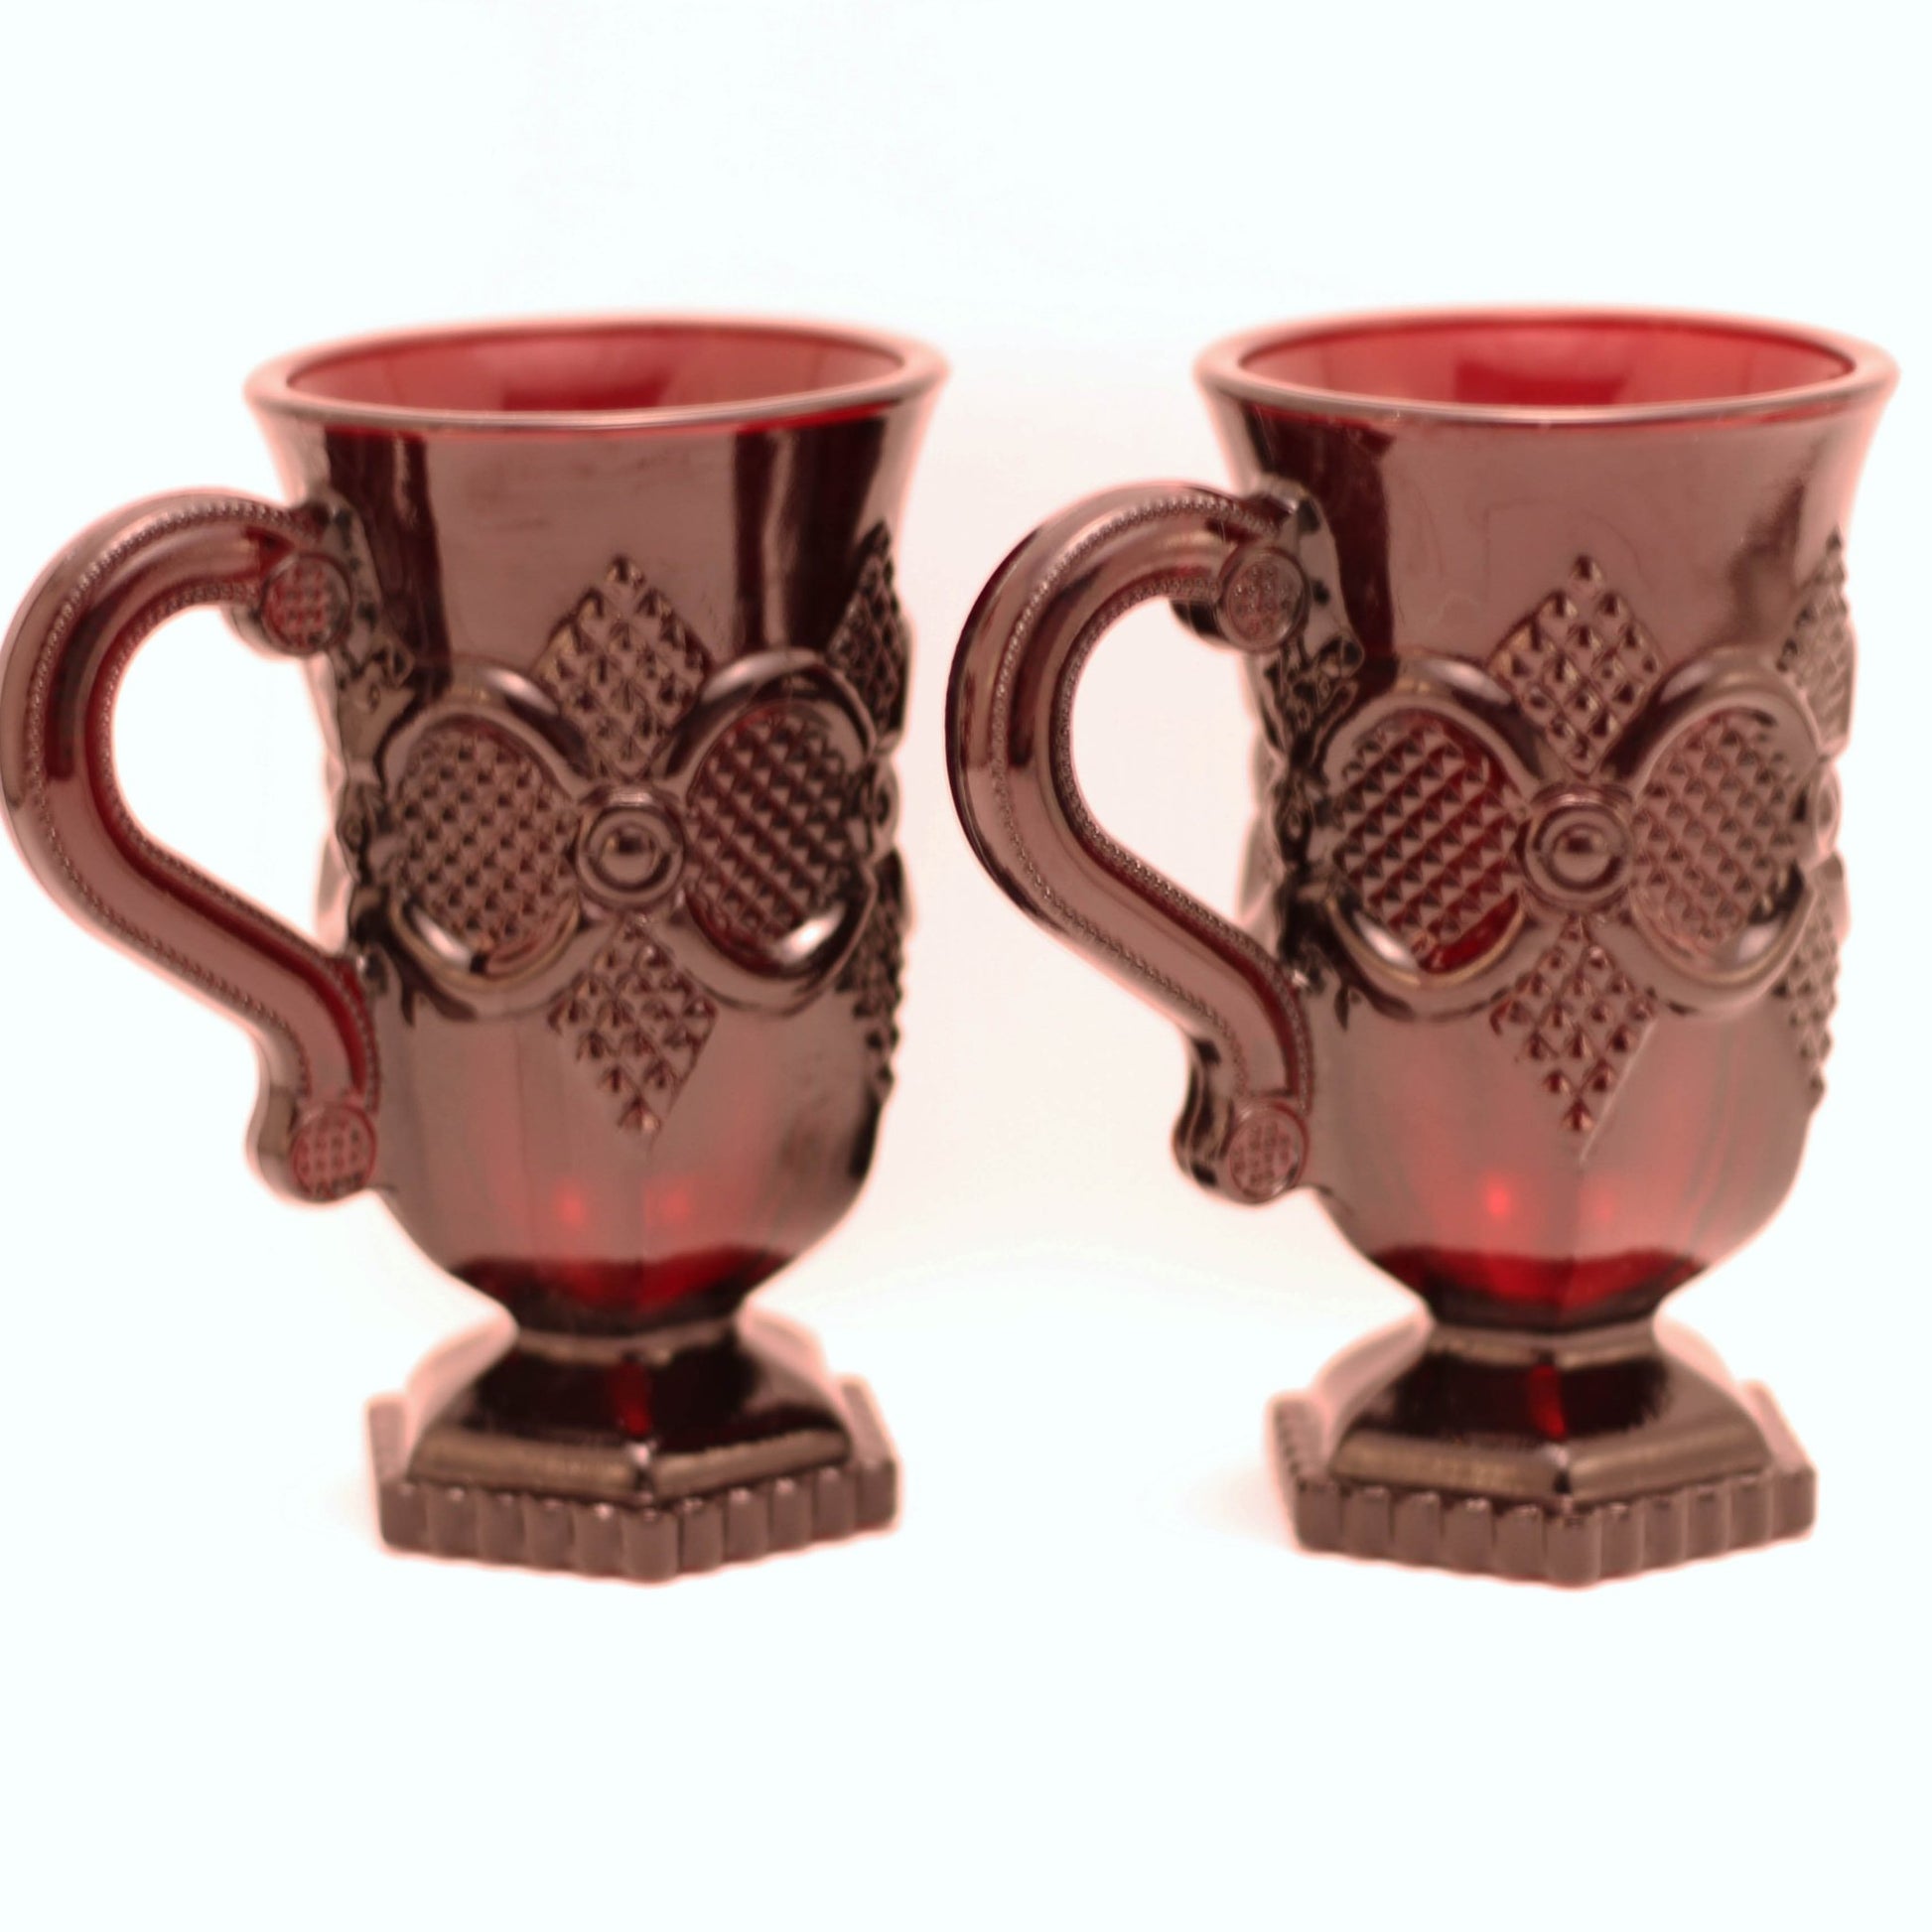 CAPE COD 1876 COLLECTION By Avon Irish Coffee Pedestal Mugs Set of Two (2)